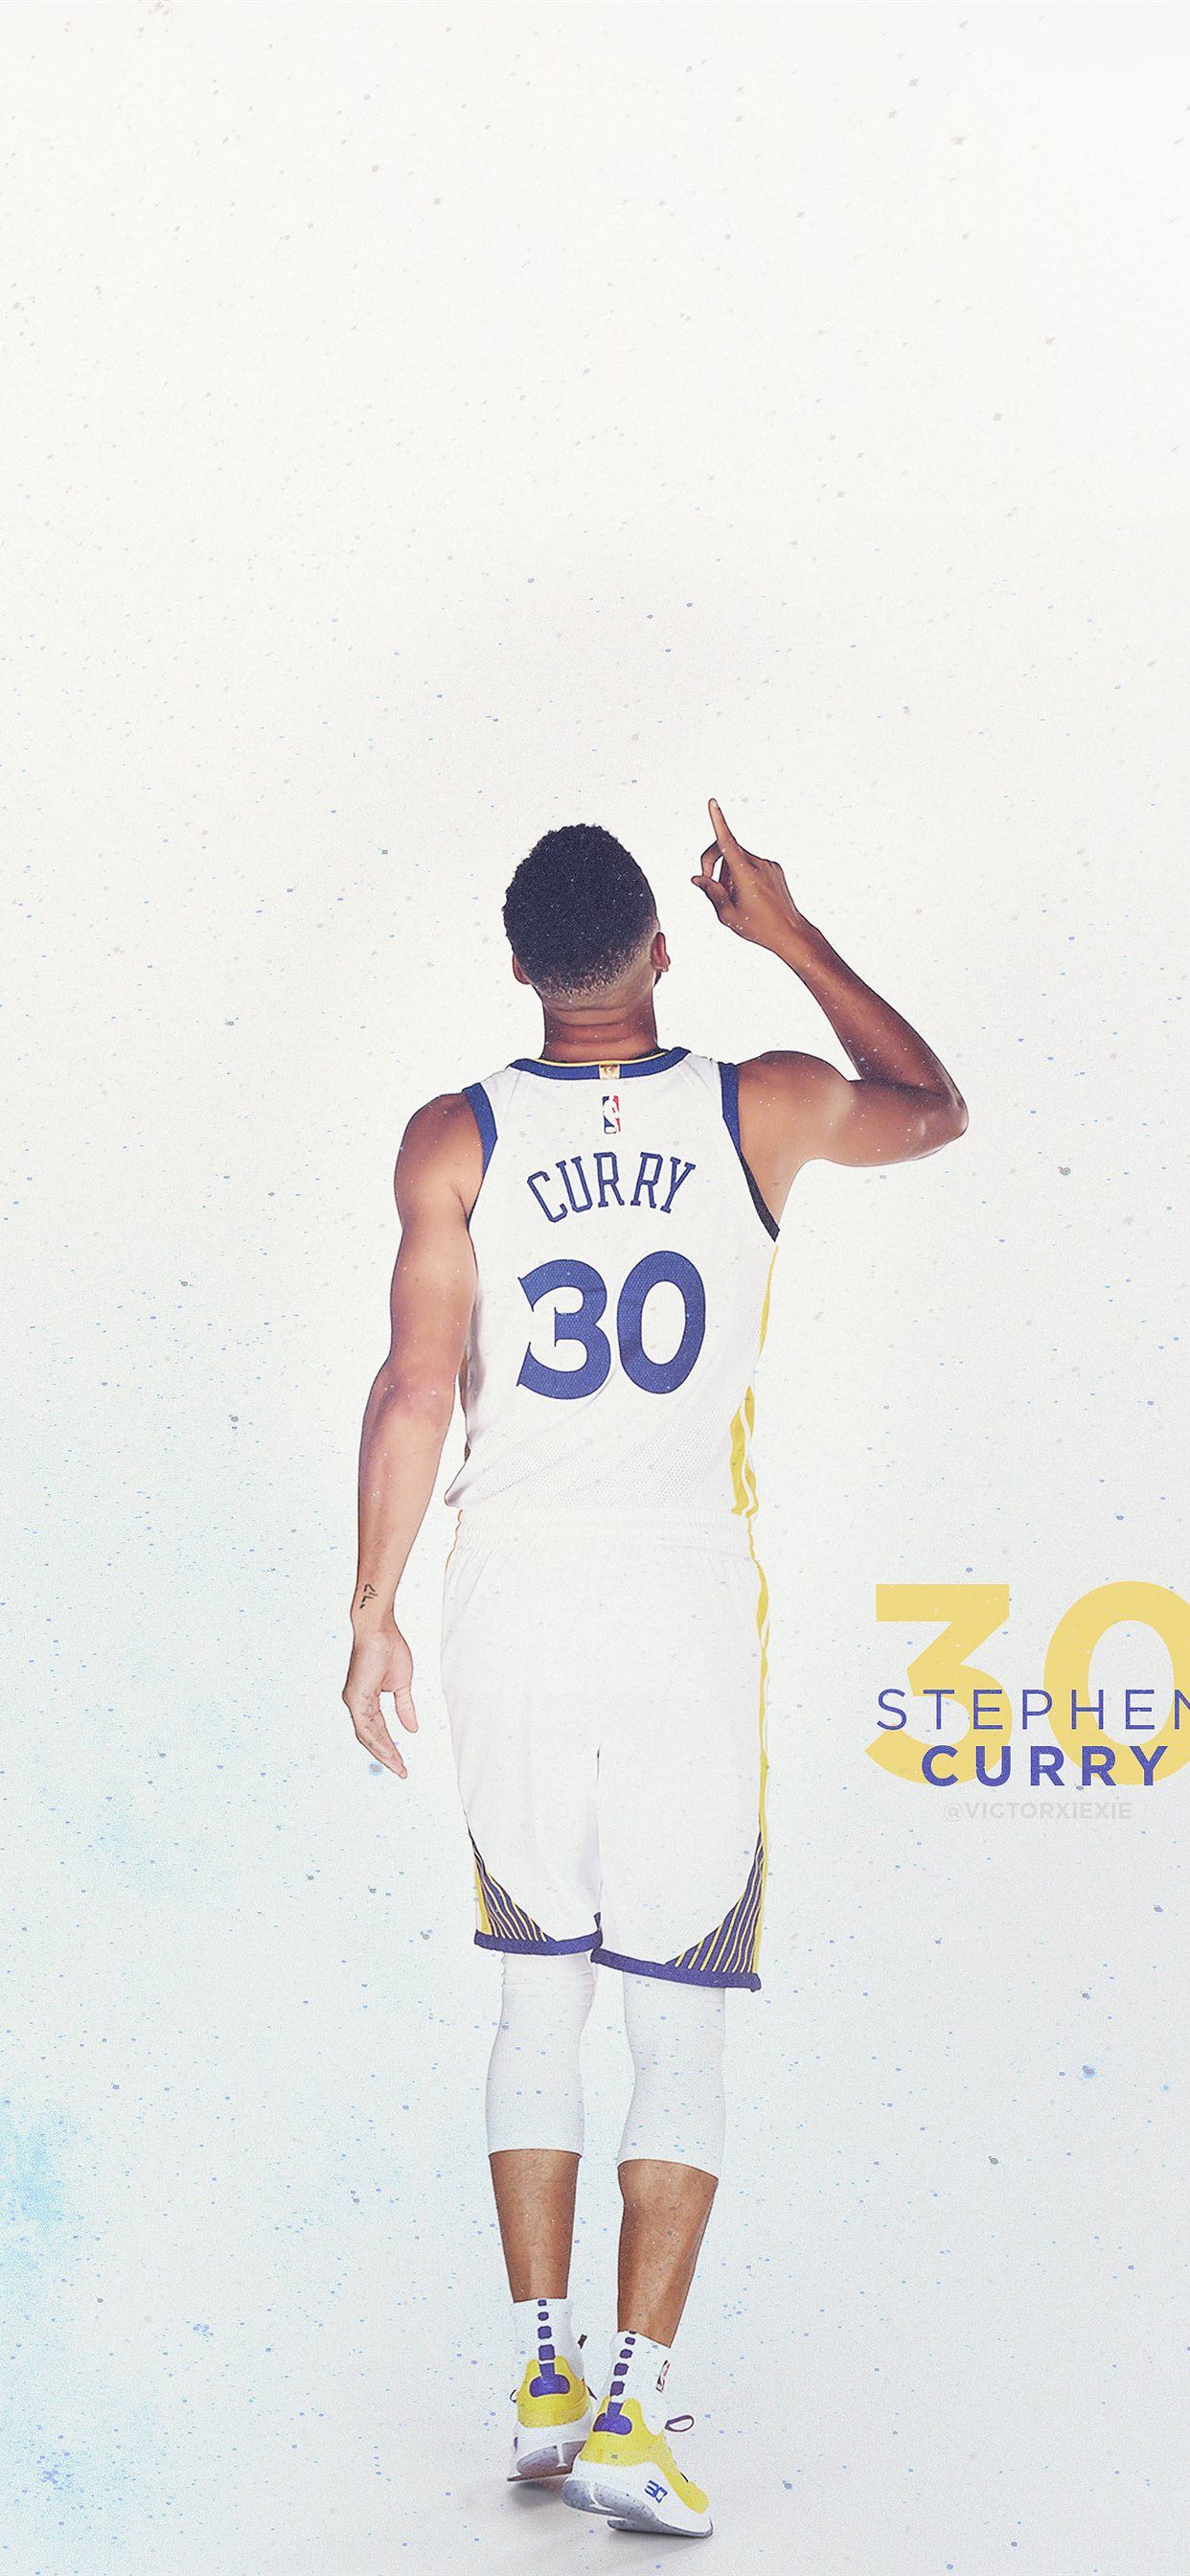 Stephen Curry Steph Curry Nba Stephen iPhone Wallpaper Free Download